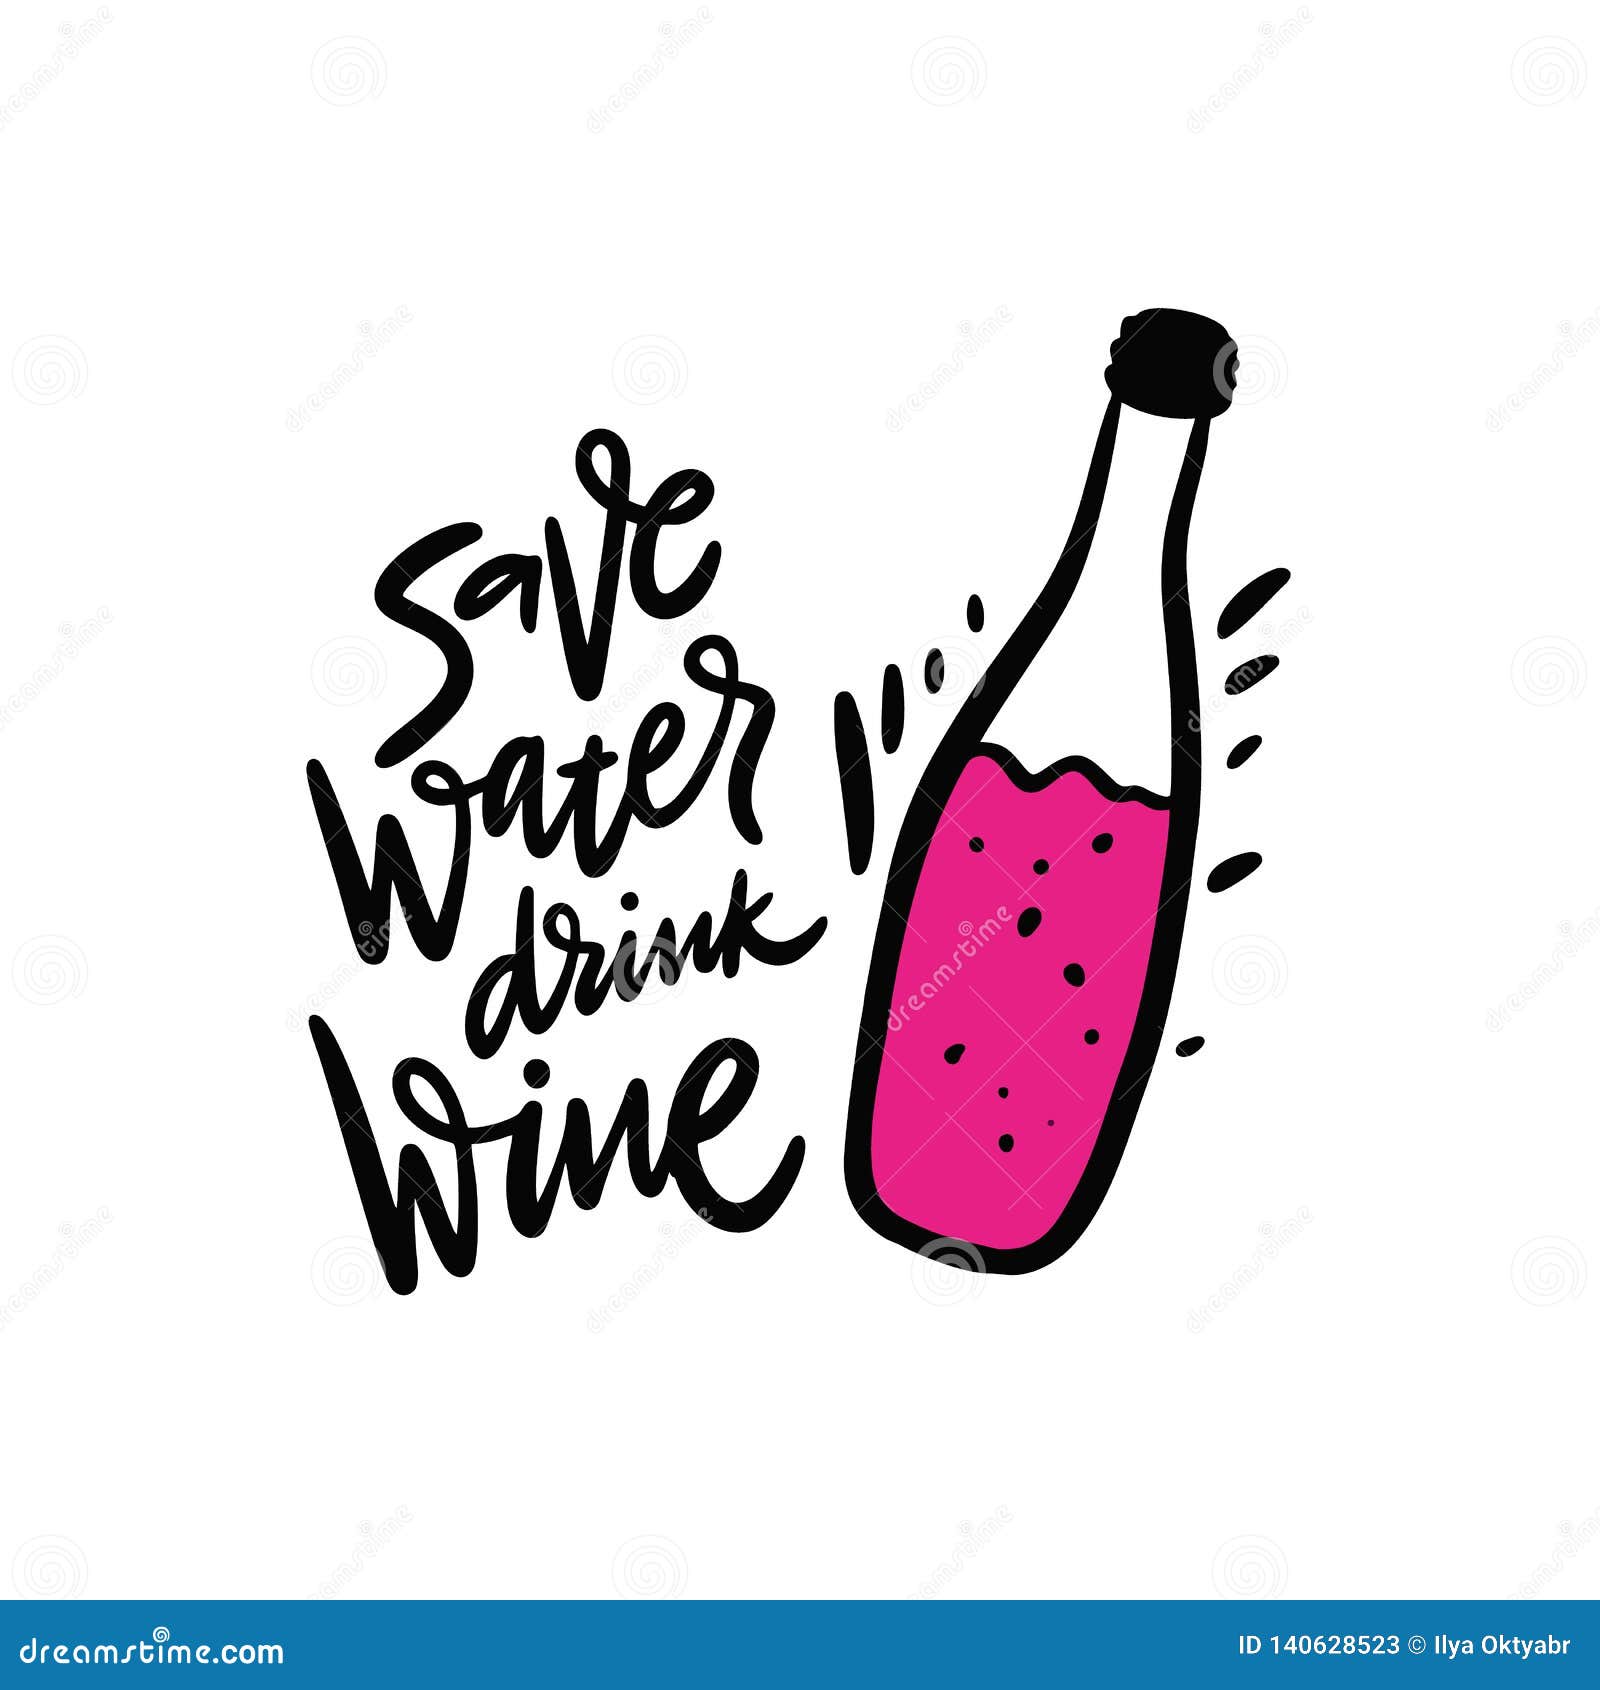 Save Water, Drink Wine Phrase. Hand Drawn Vector Lettering Quote. Cartoon  Style. Isolated on White Background Stock Vector - Illustration of drink,  hand: 140628523